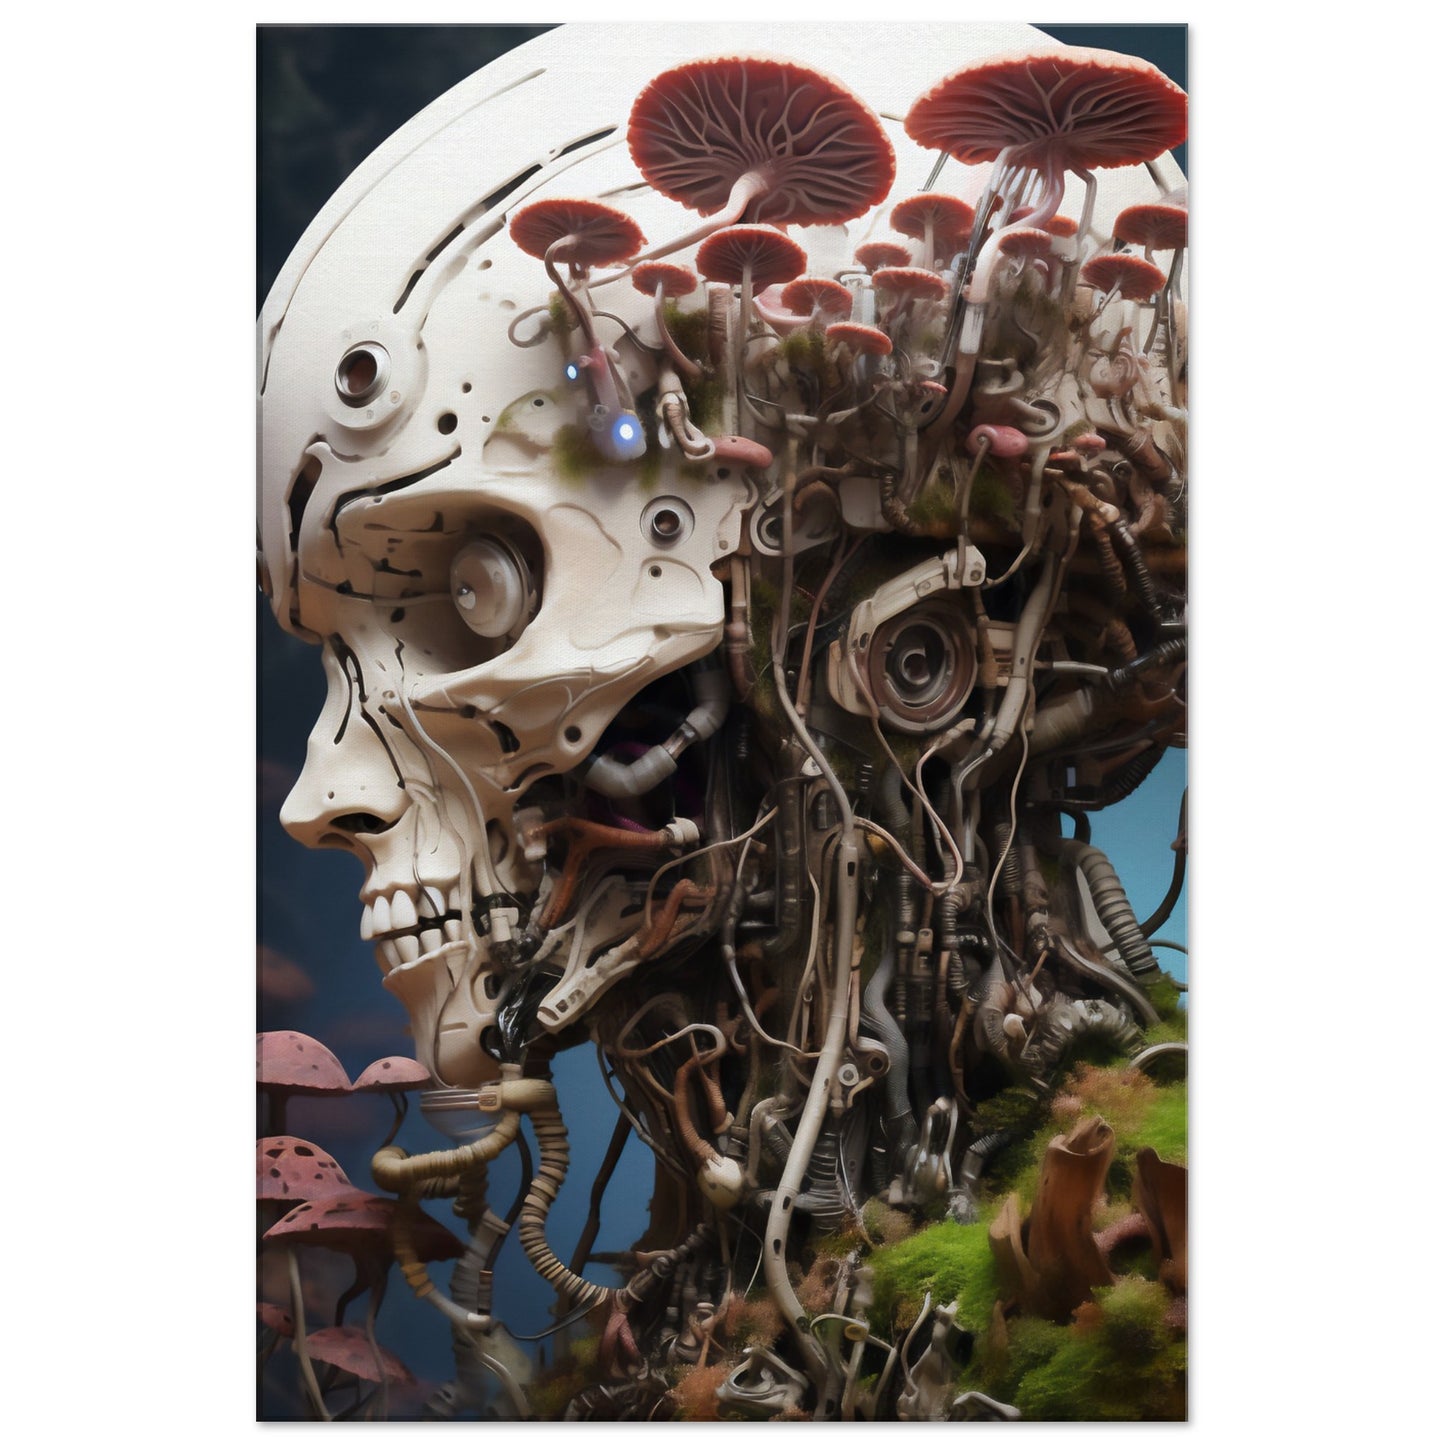 Cyborg Mushrooms: A Surreal Fusion of Nature and Technology